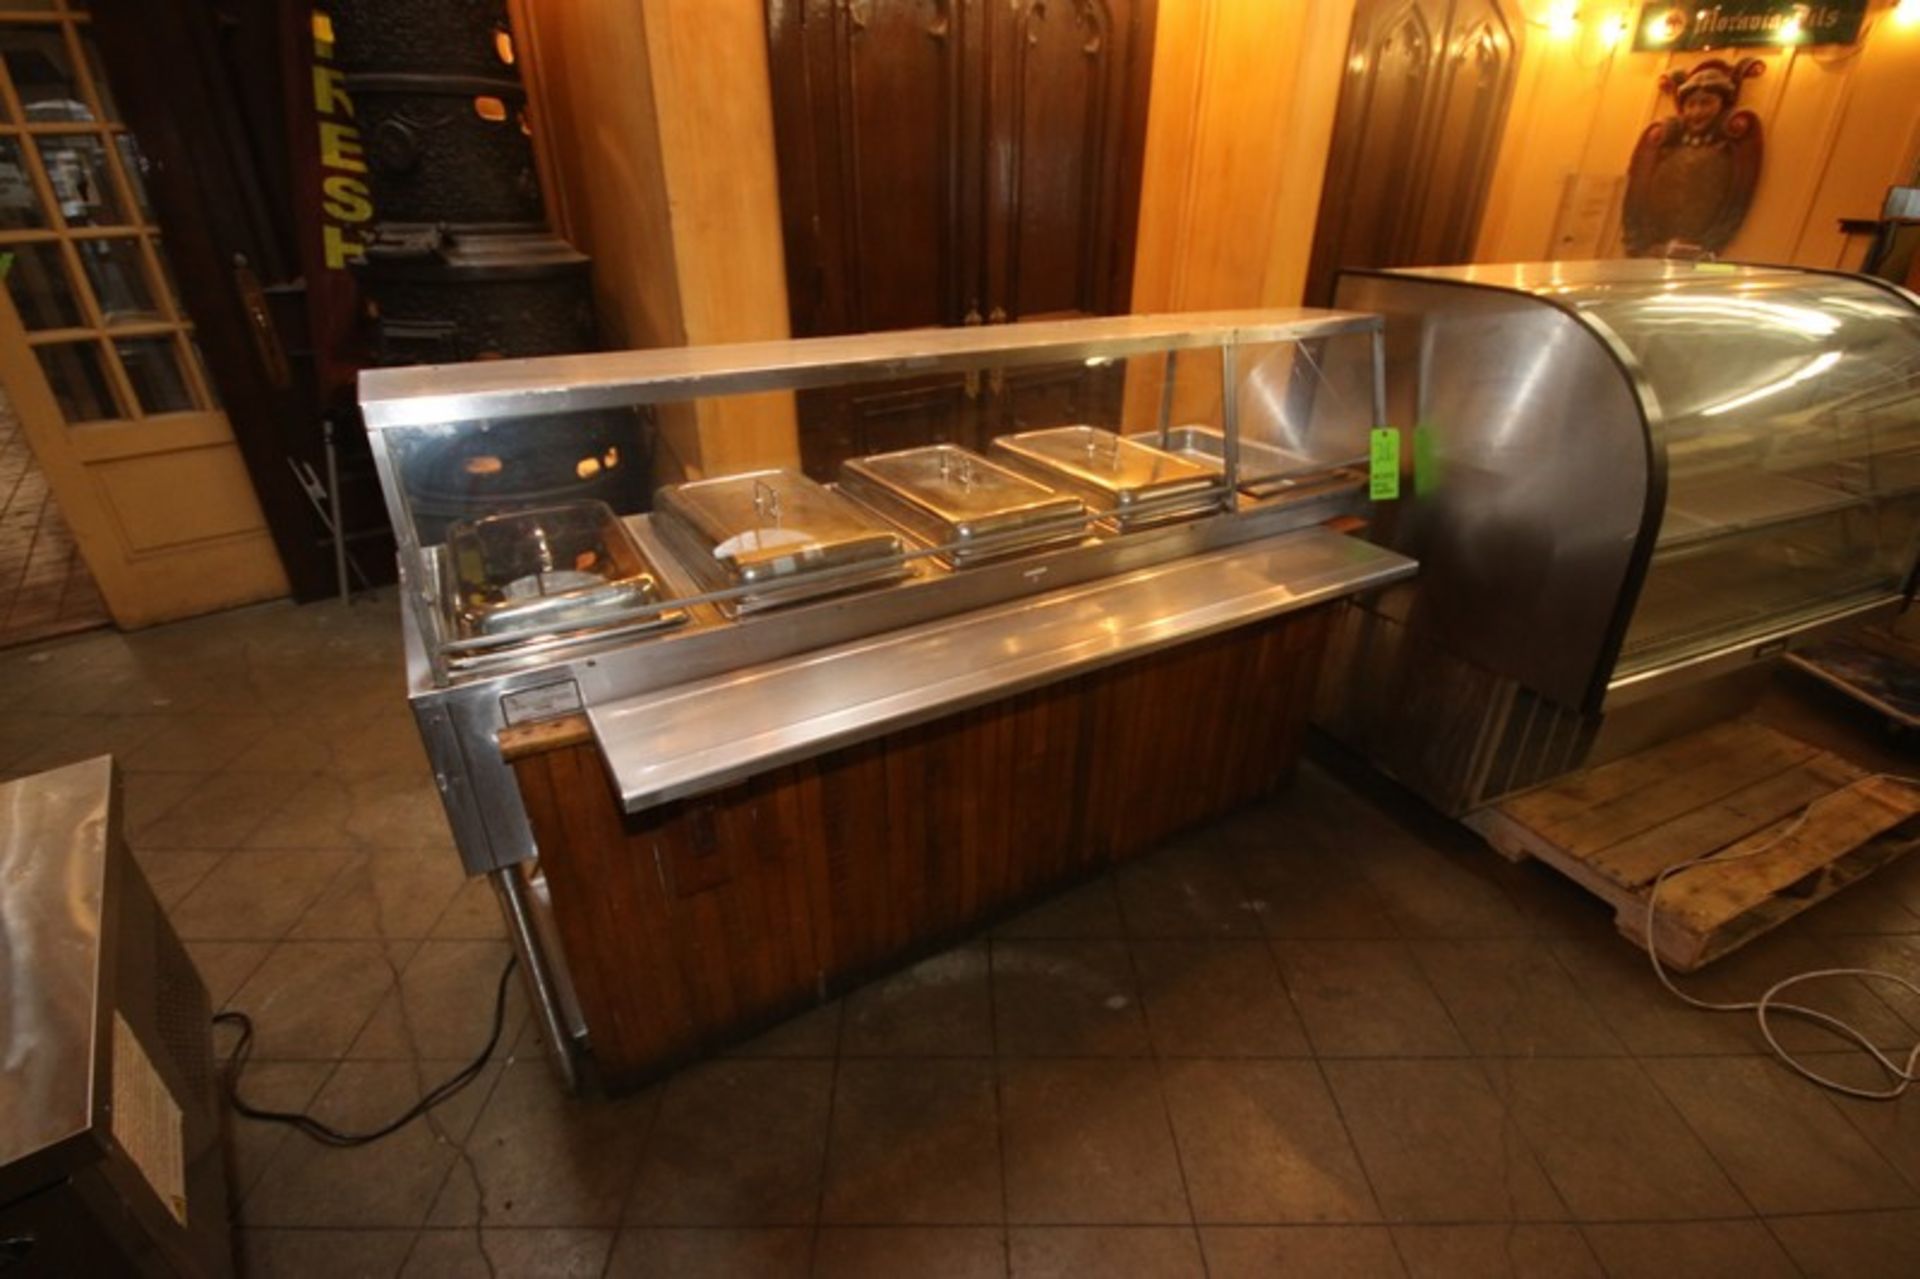 CSP S/S Serving Counter, with 5-Warming Compartments, Overall Dims. of Counter: Aprox. 79" L x 35" W - Image 2 of 6